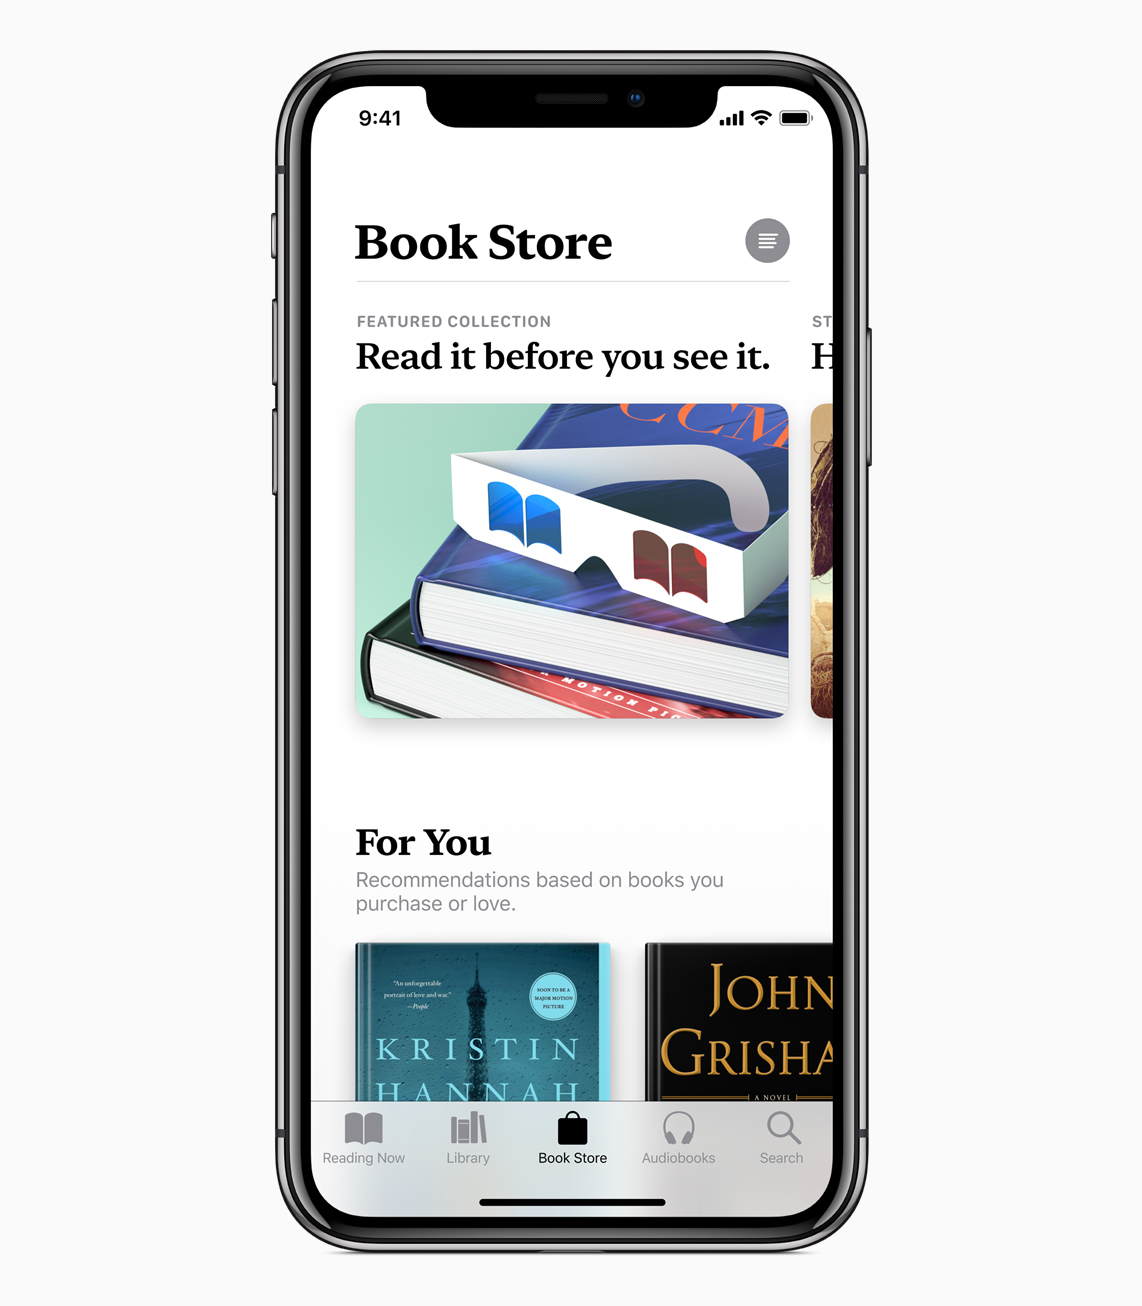 The Apple Books app, showing off the New York typeface.